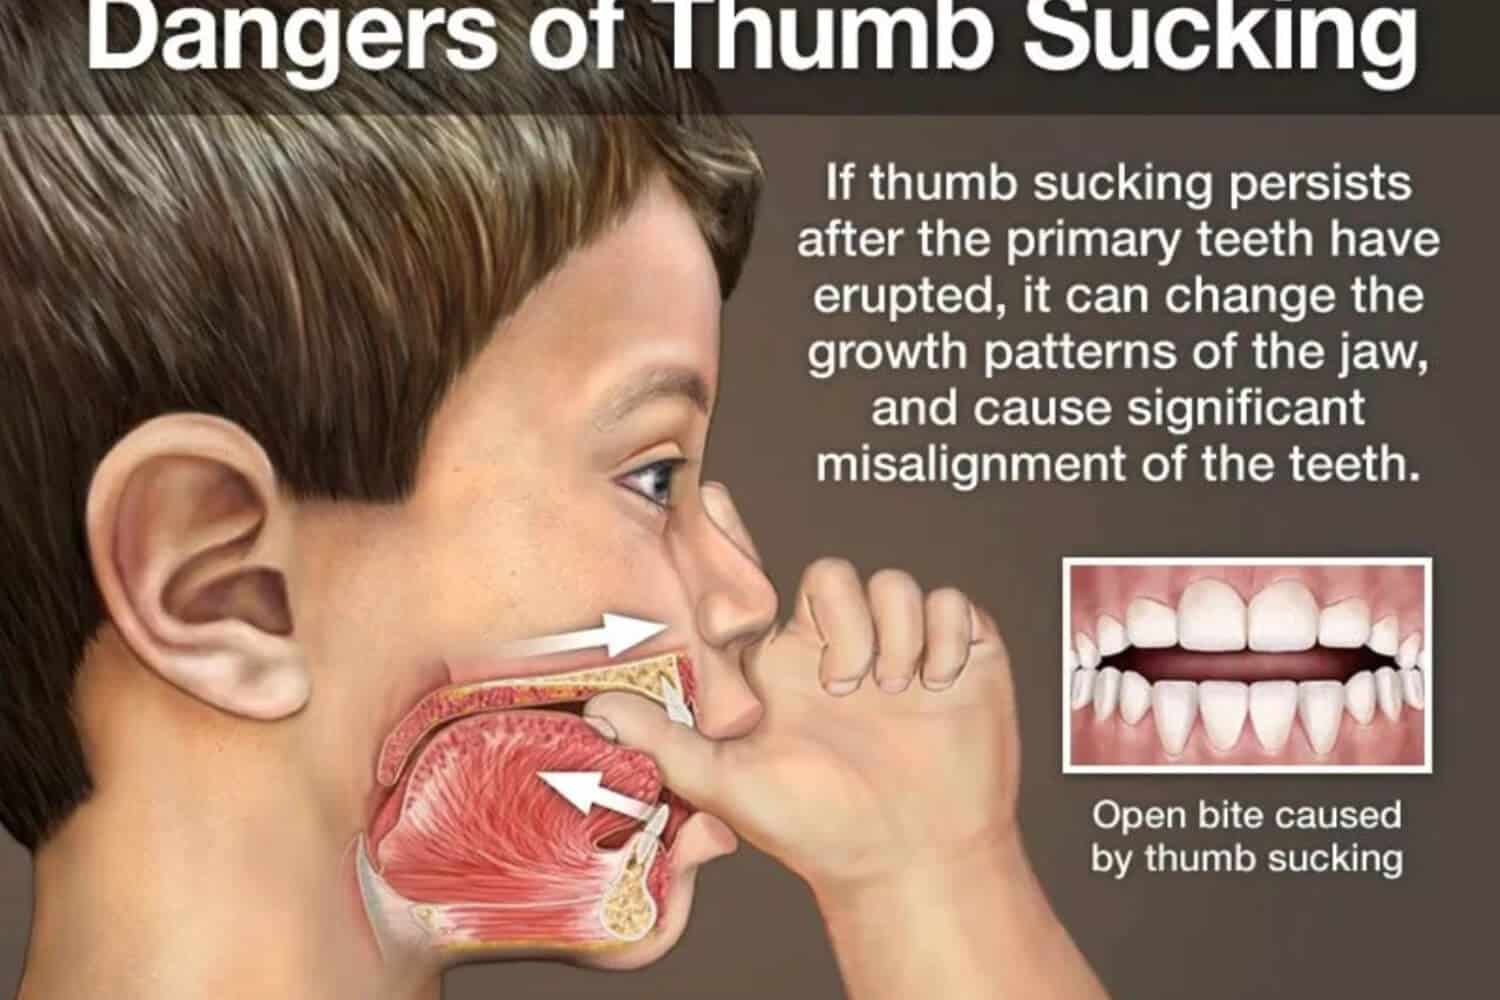 A Close Up Image Of Teeth With A Thumb In The Mouth Illustrating The Effects Of Thumb Sucking Teeth Habit And The Need To Break It Using Effective Strategies. 1